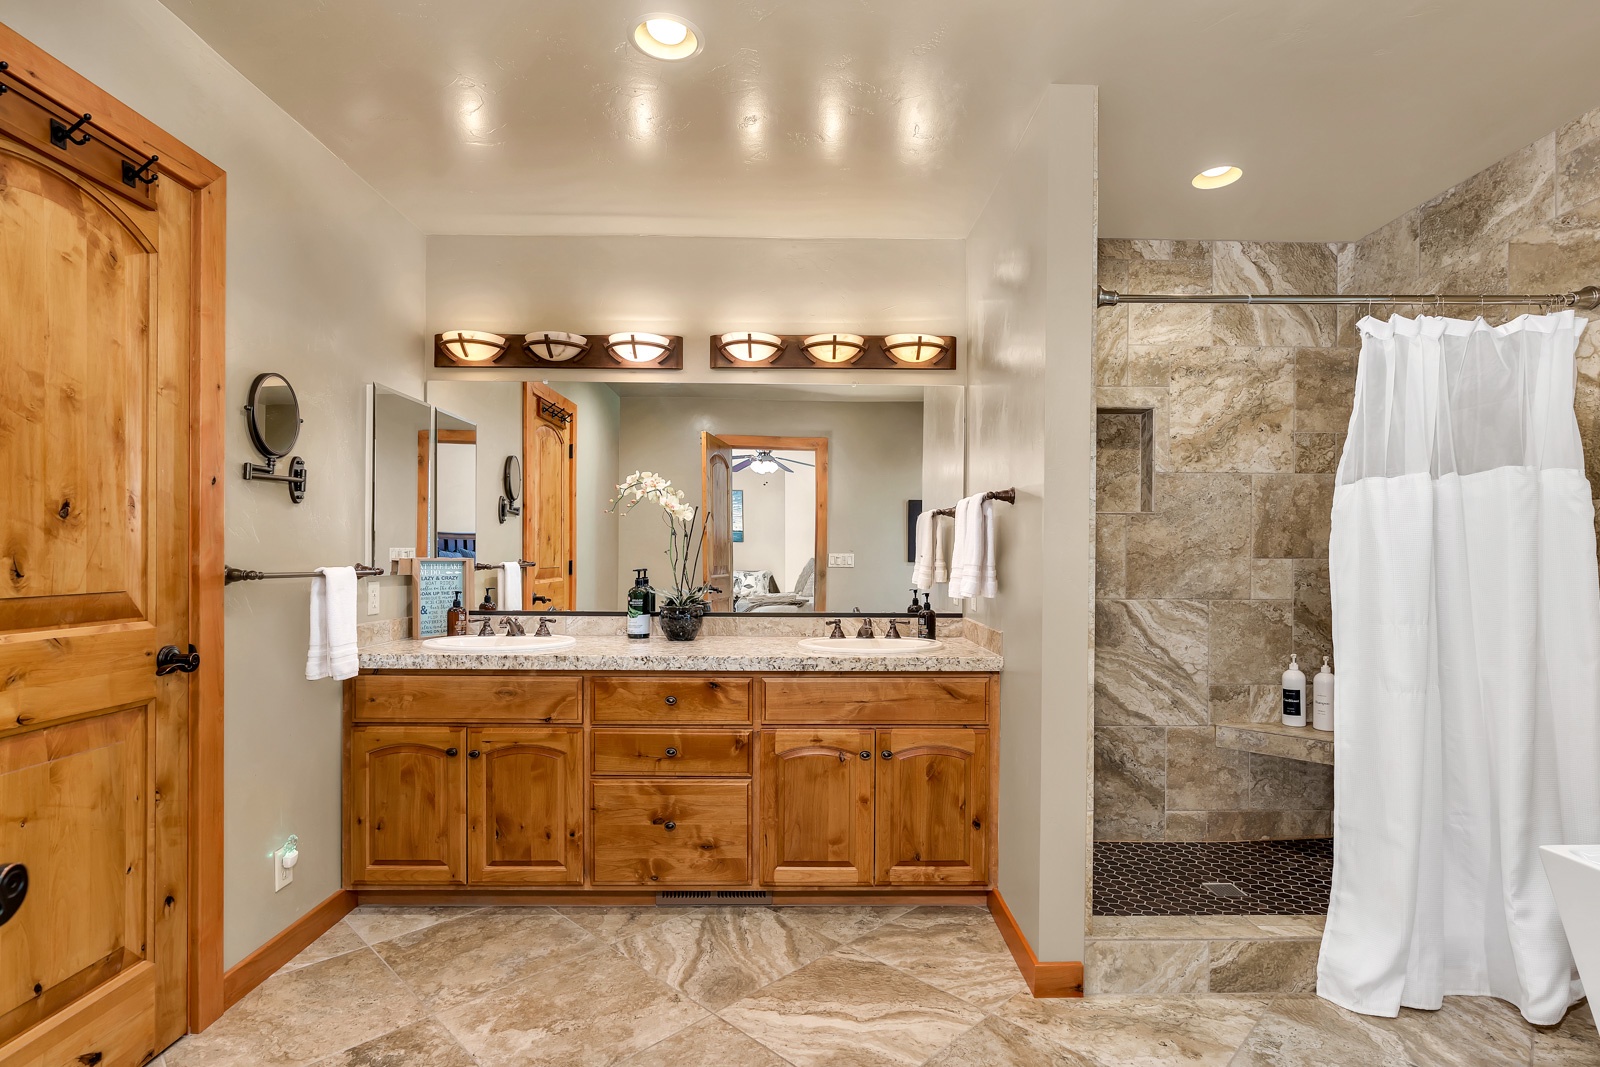 The main-level master en suite boasts a double vanity, shower, & soaking tub